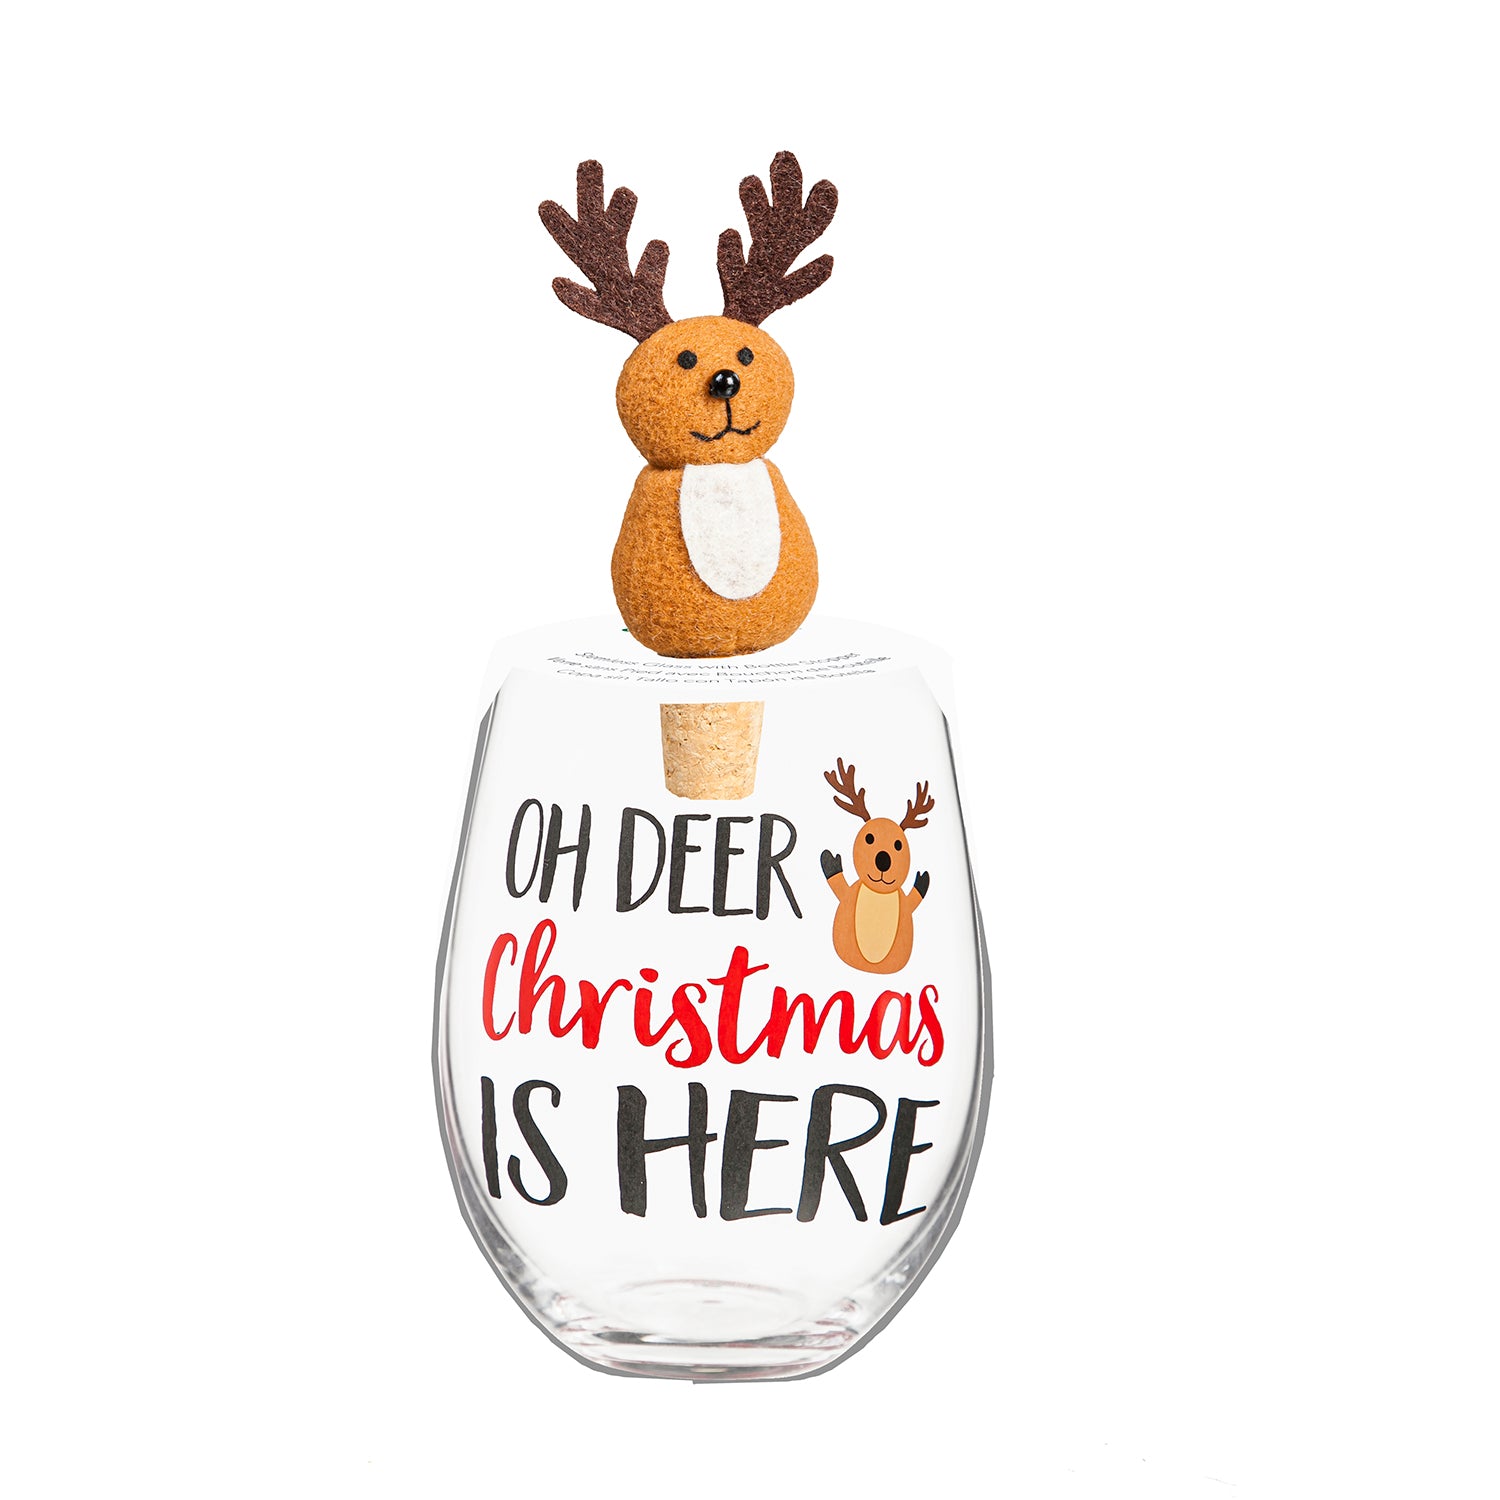 Stemless Wine Glass with Reindeer Cork Wine Stopper Gift Set